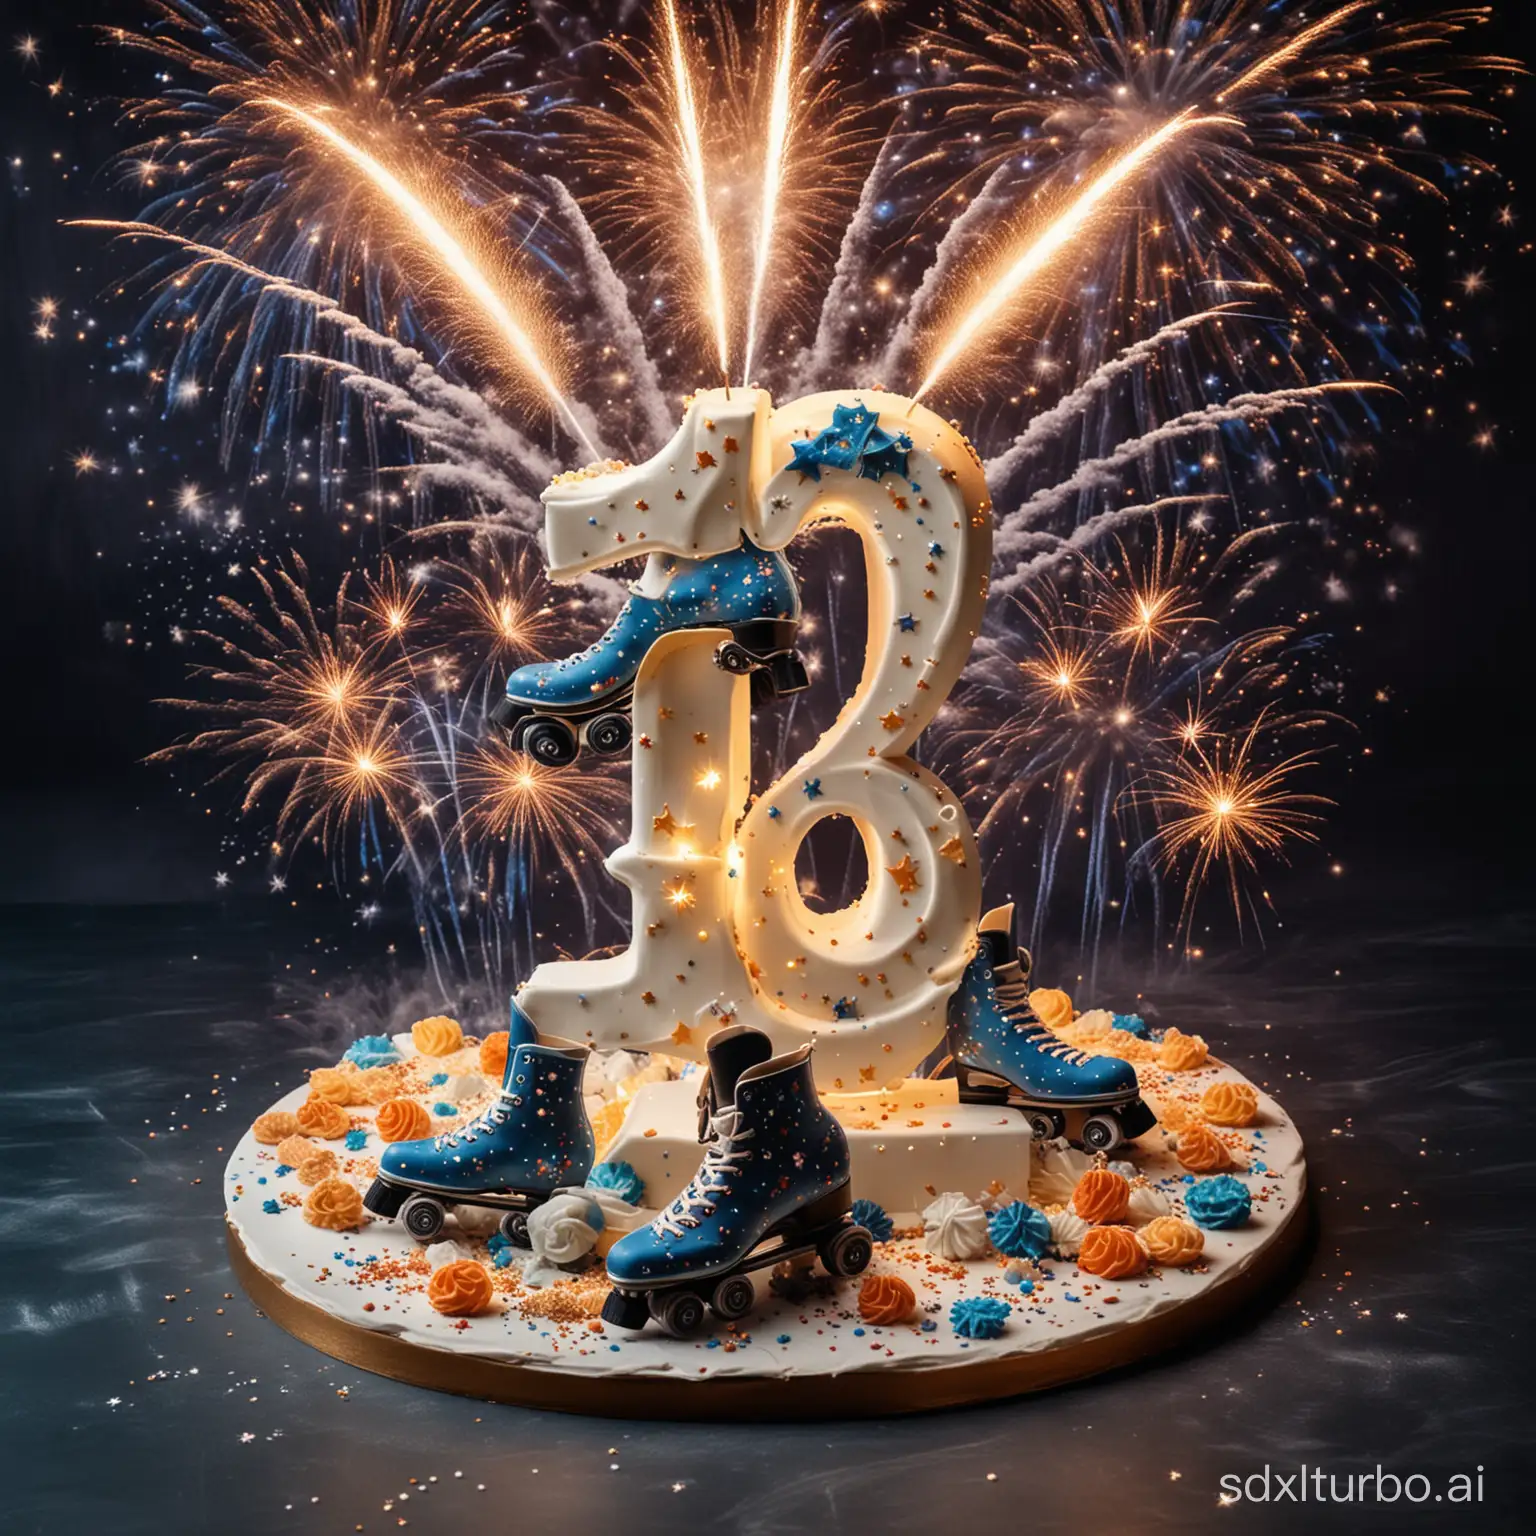 birthday cake with a number 16 in the center in the shape of a candle and some roller skates on a background of fireworks